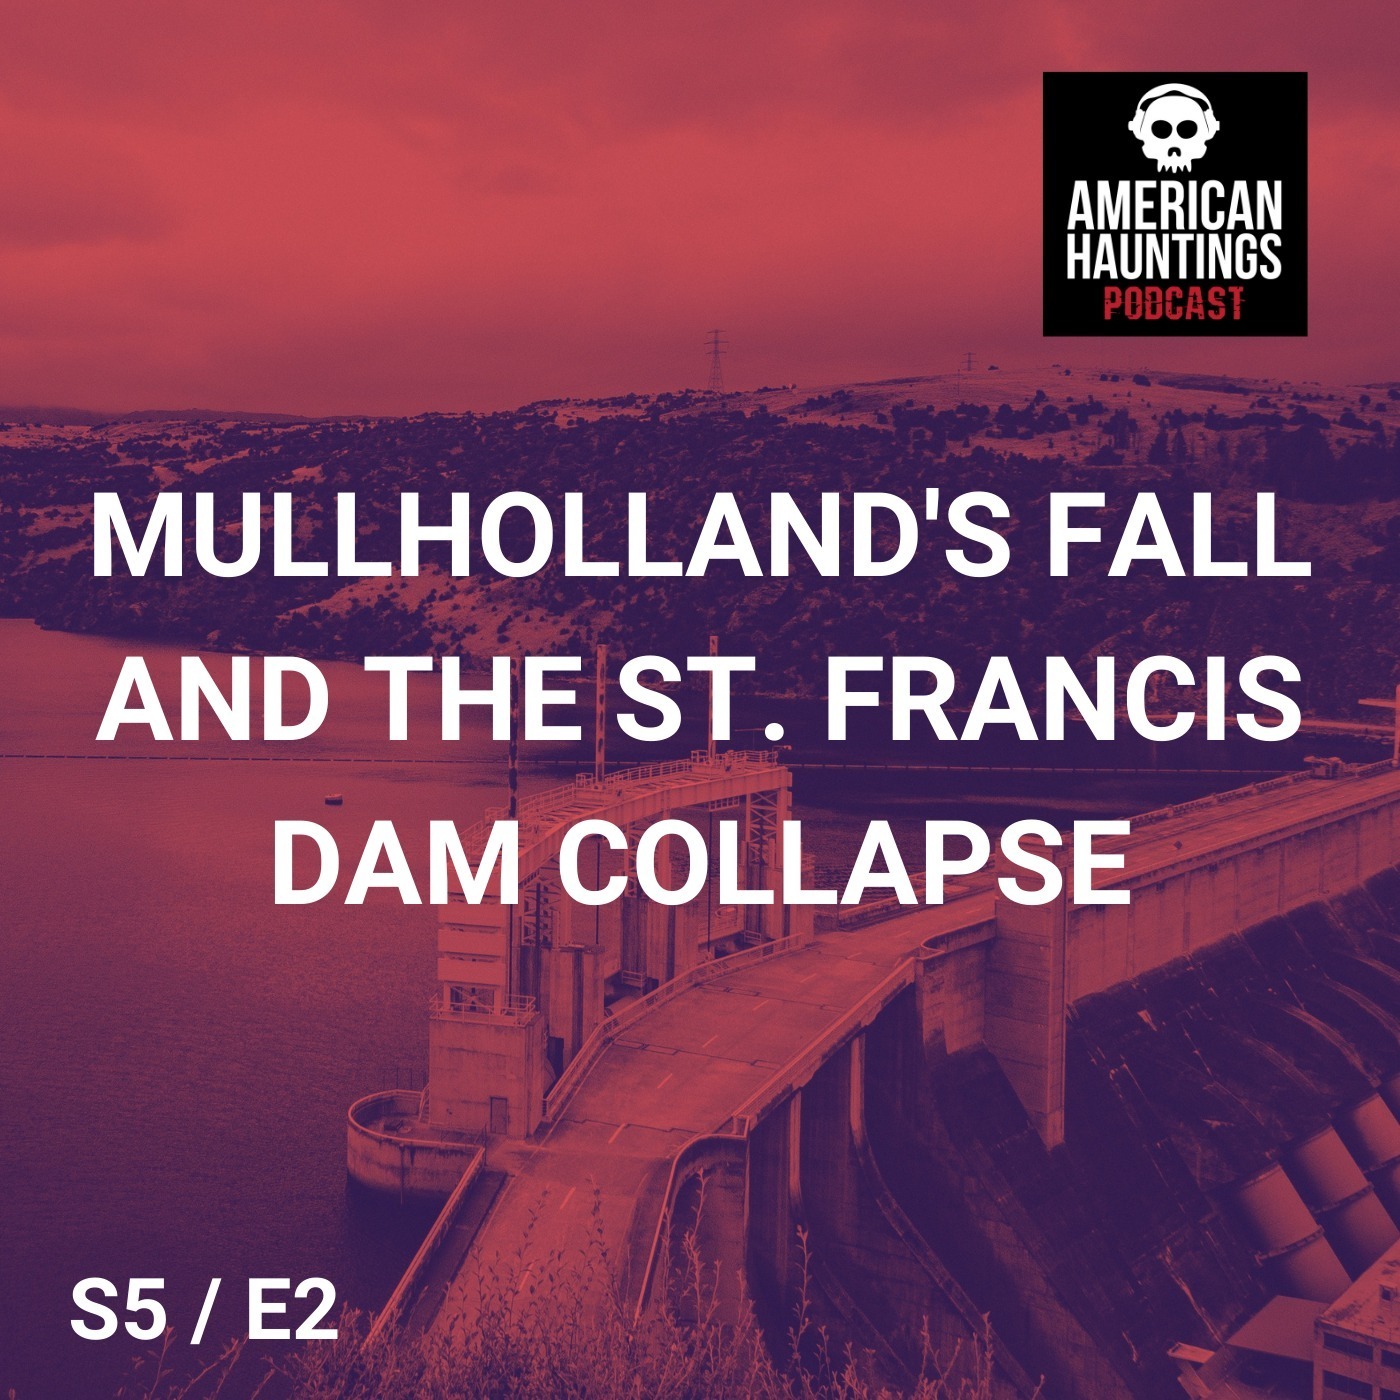 Mullholland's Fall And The St. Francis Dam Collapse